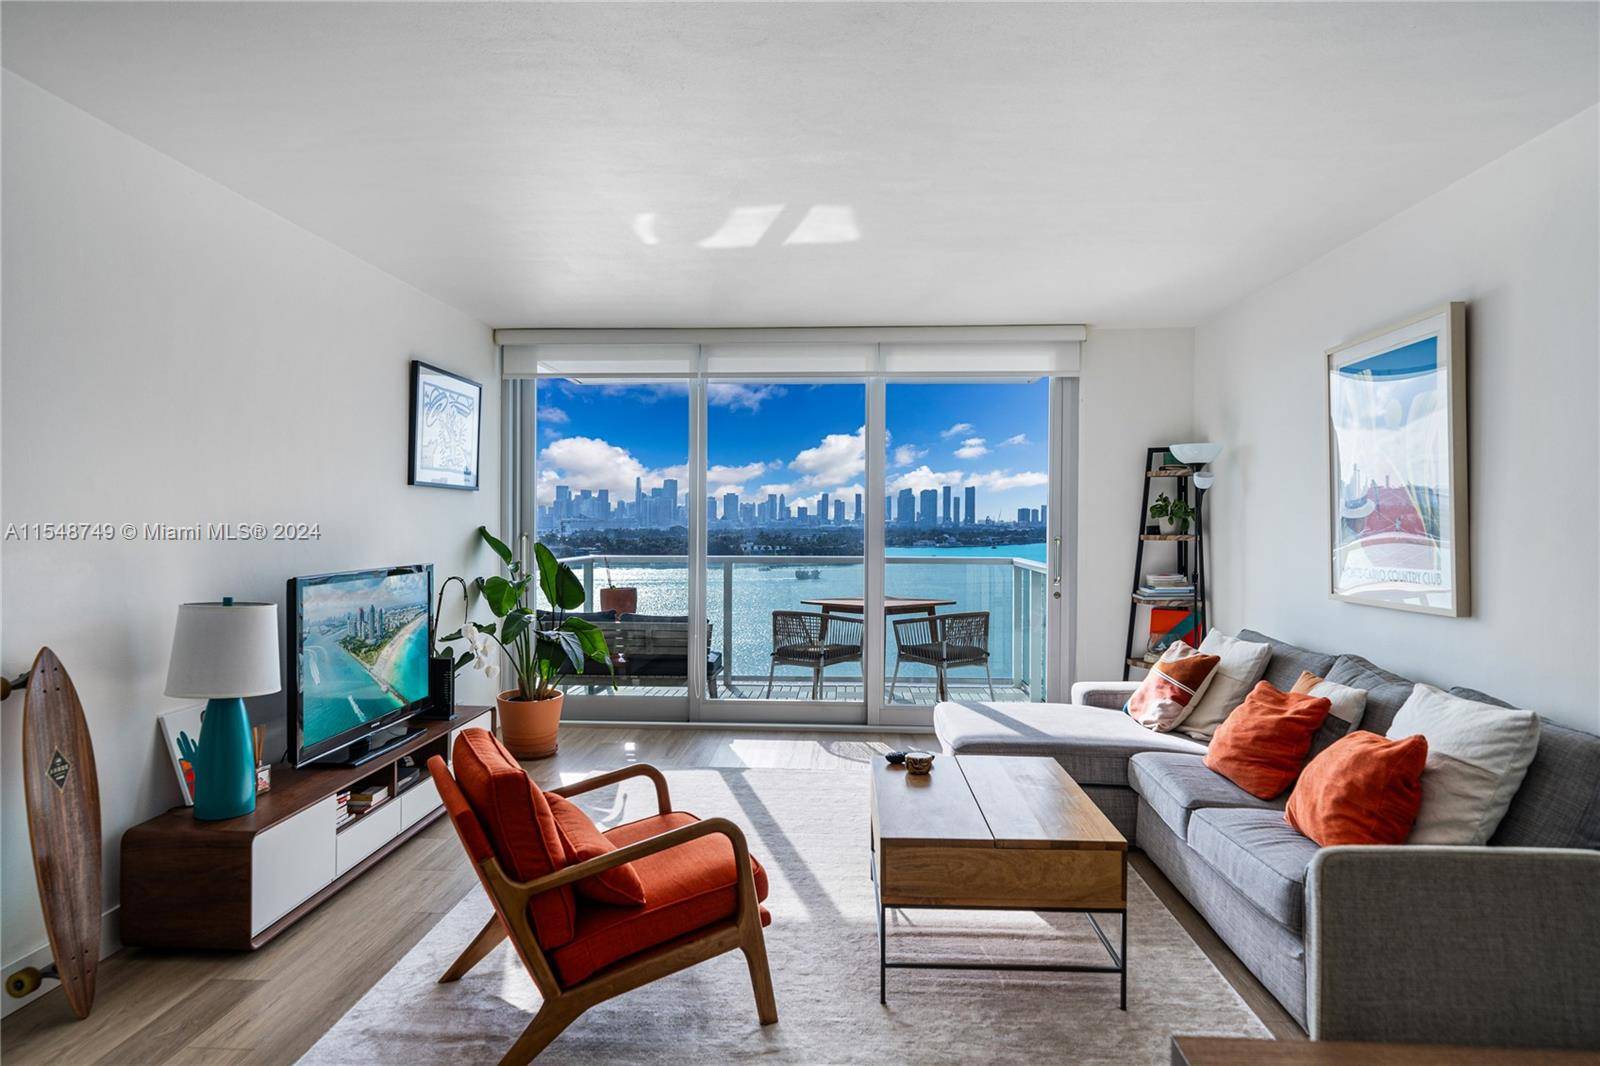 Enjoy South Beach living at its best in this fully renovated unit in the iconic Mirador 1000.